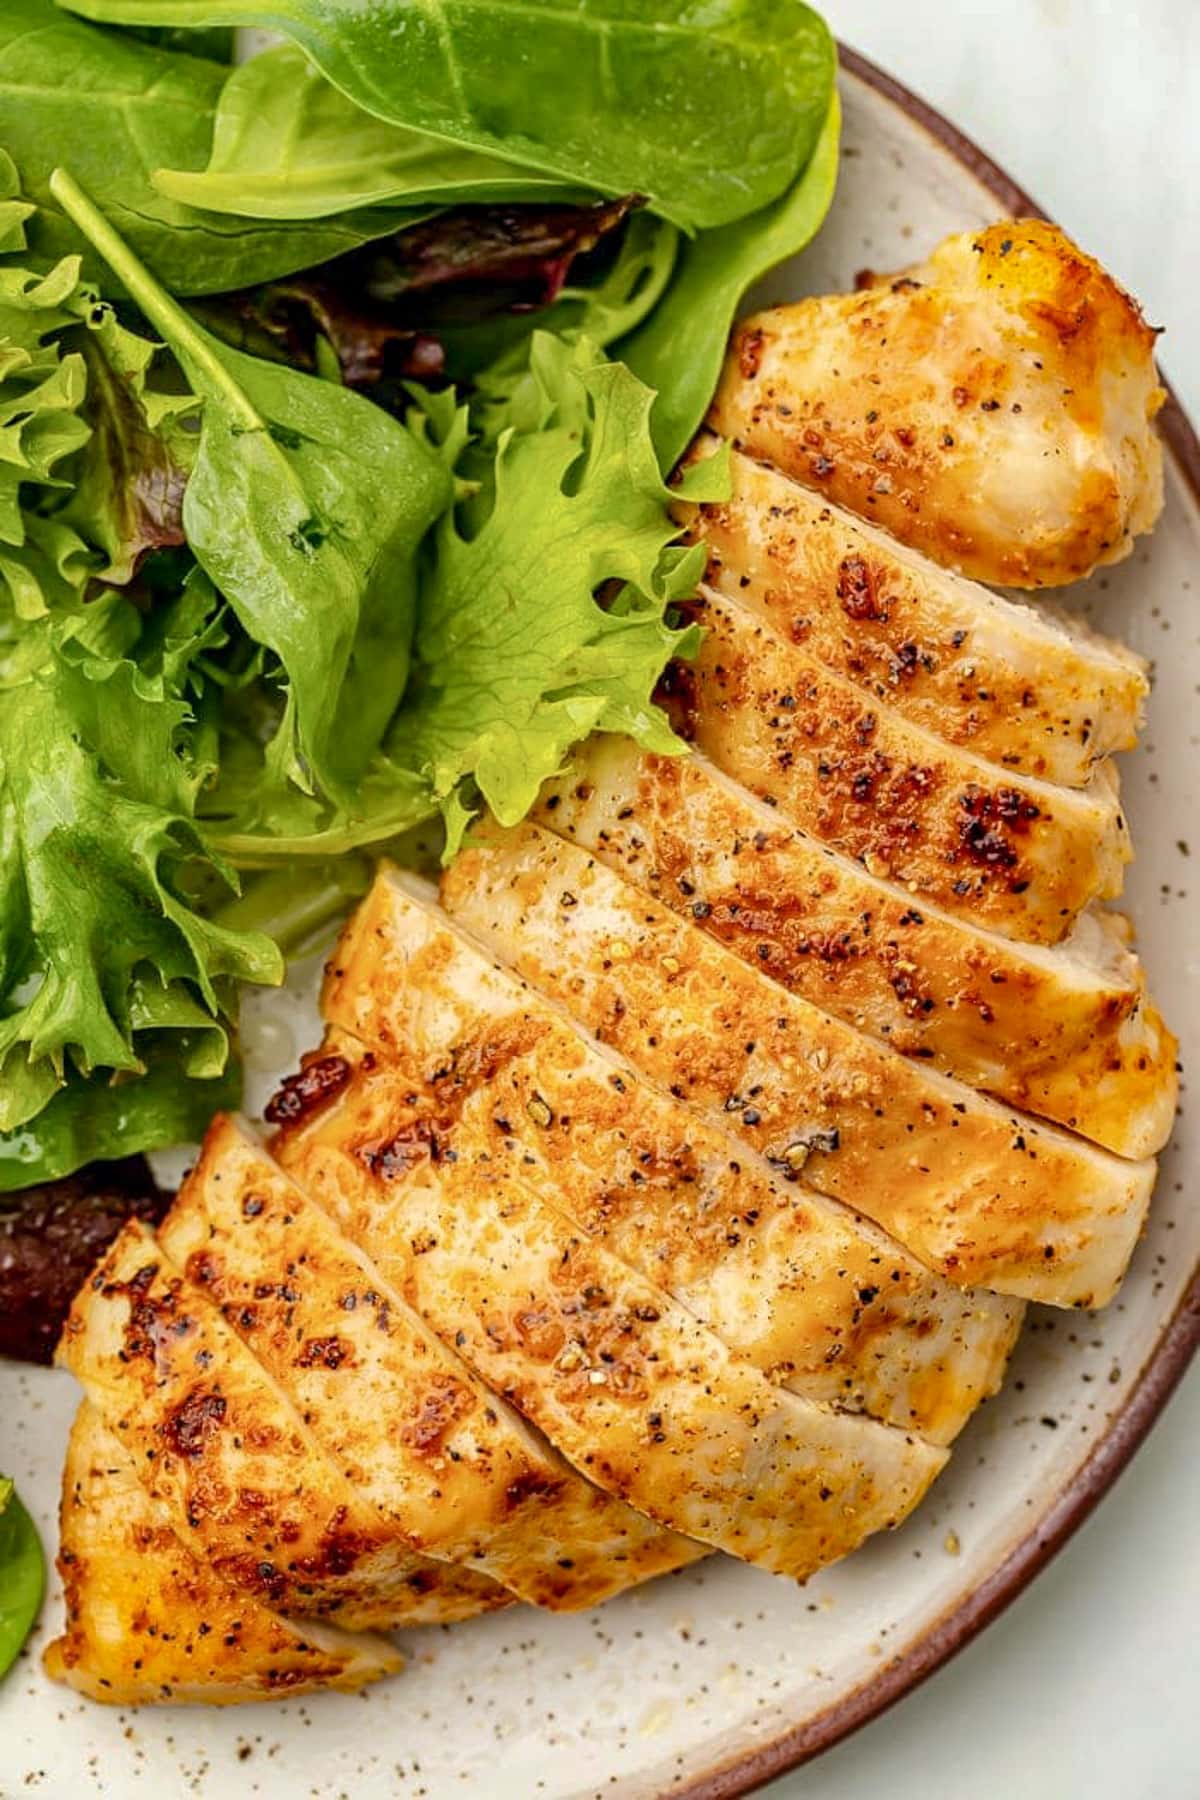 A chicken breast, cooked in the air fryer, sliced and plated with a small green leaf salad.